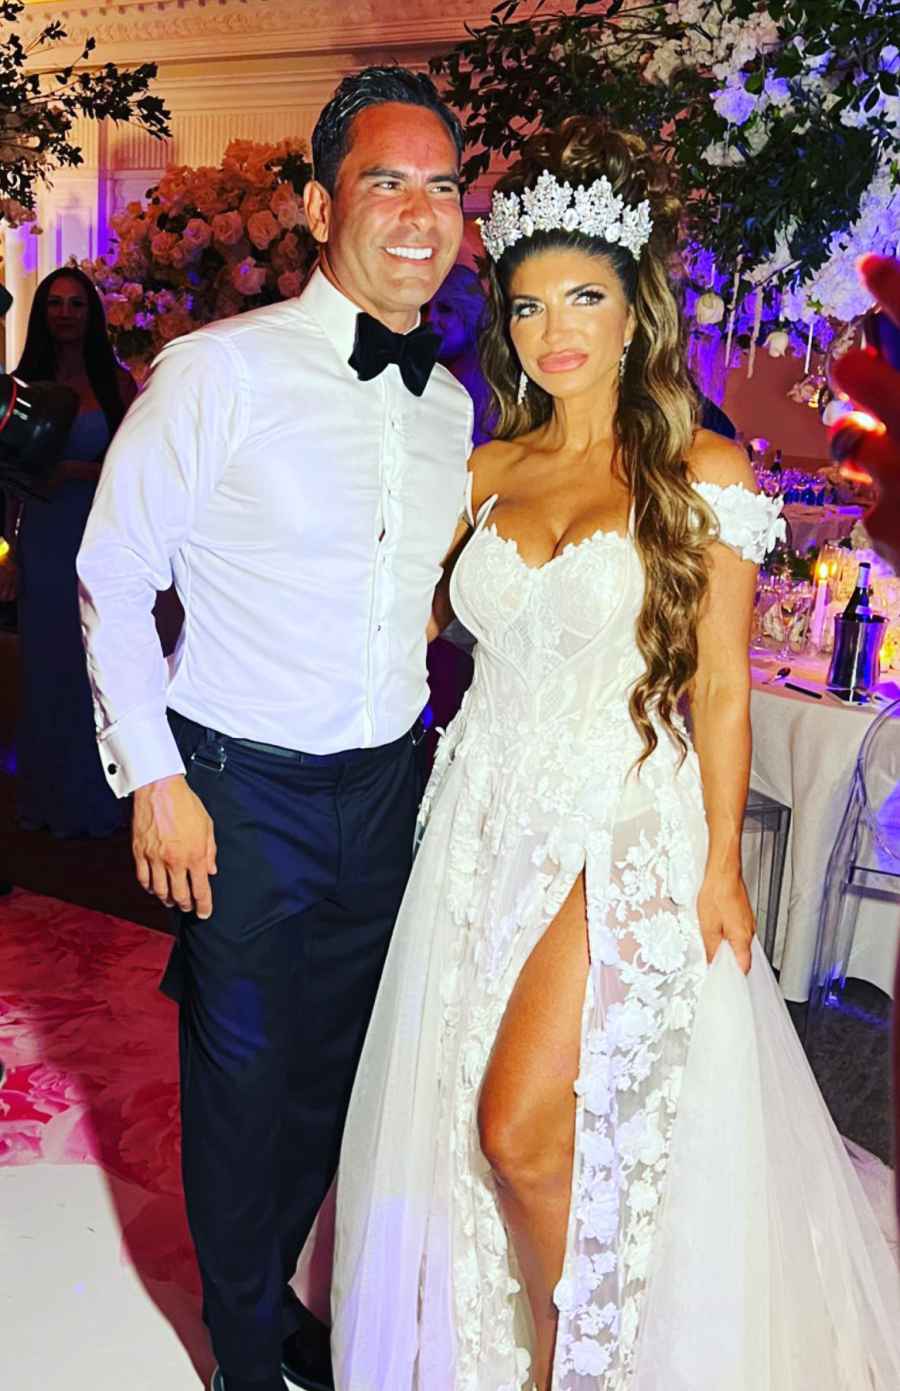 ‘Real Housewives of New Jersey’ Star Teresa Giudice and Luis Ruelas Are Married: Wedding Photos